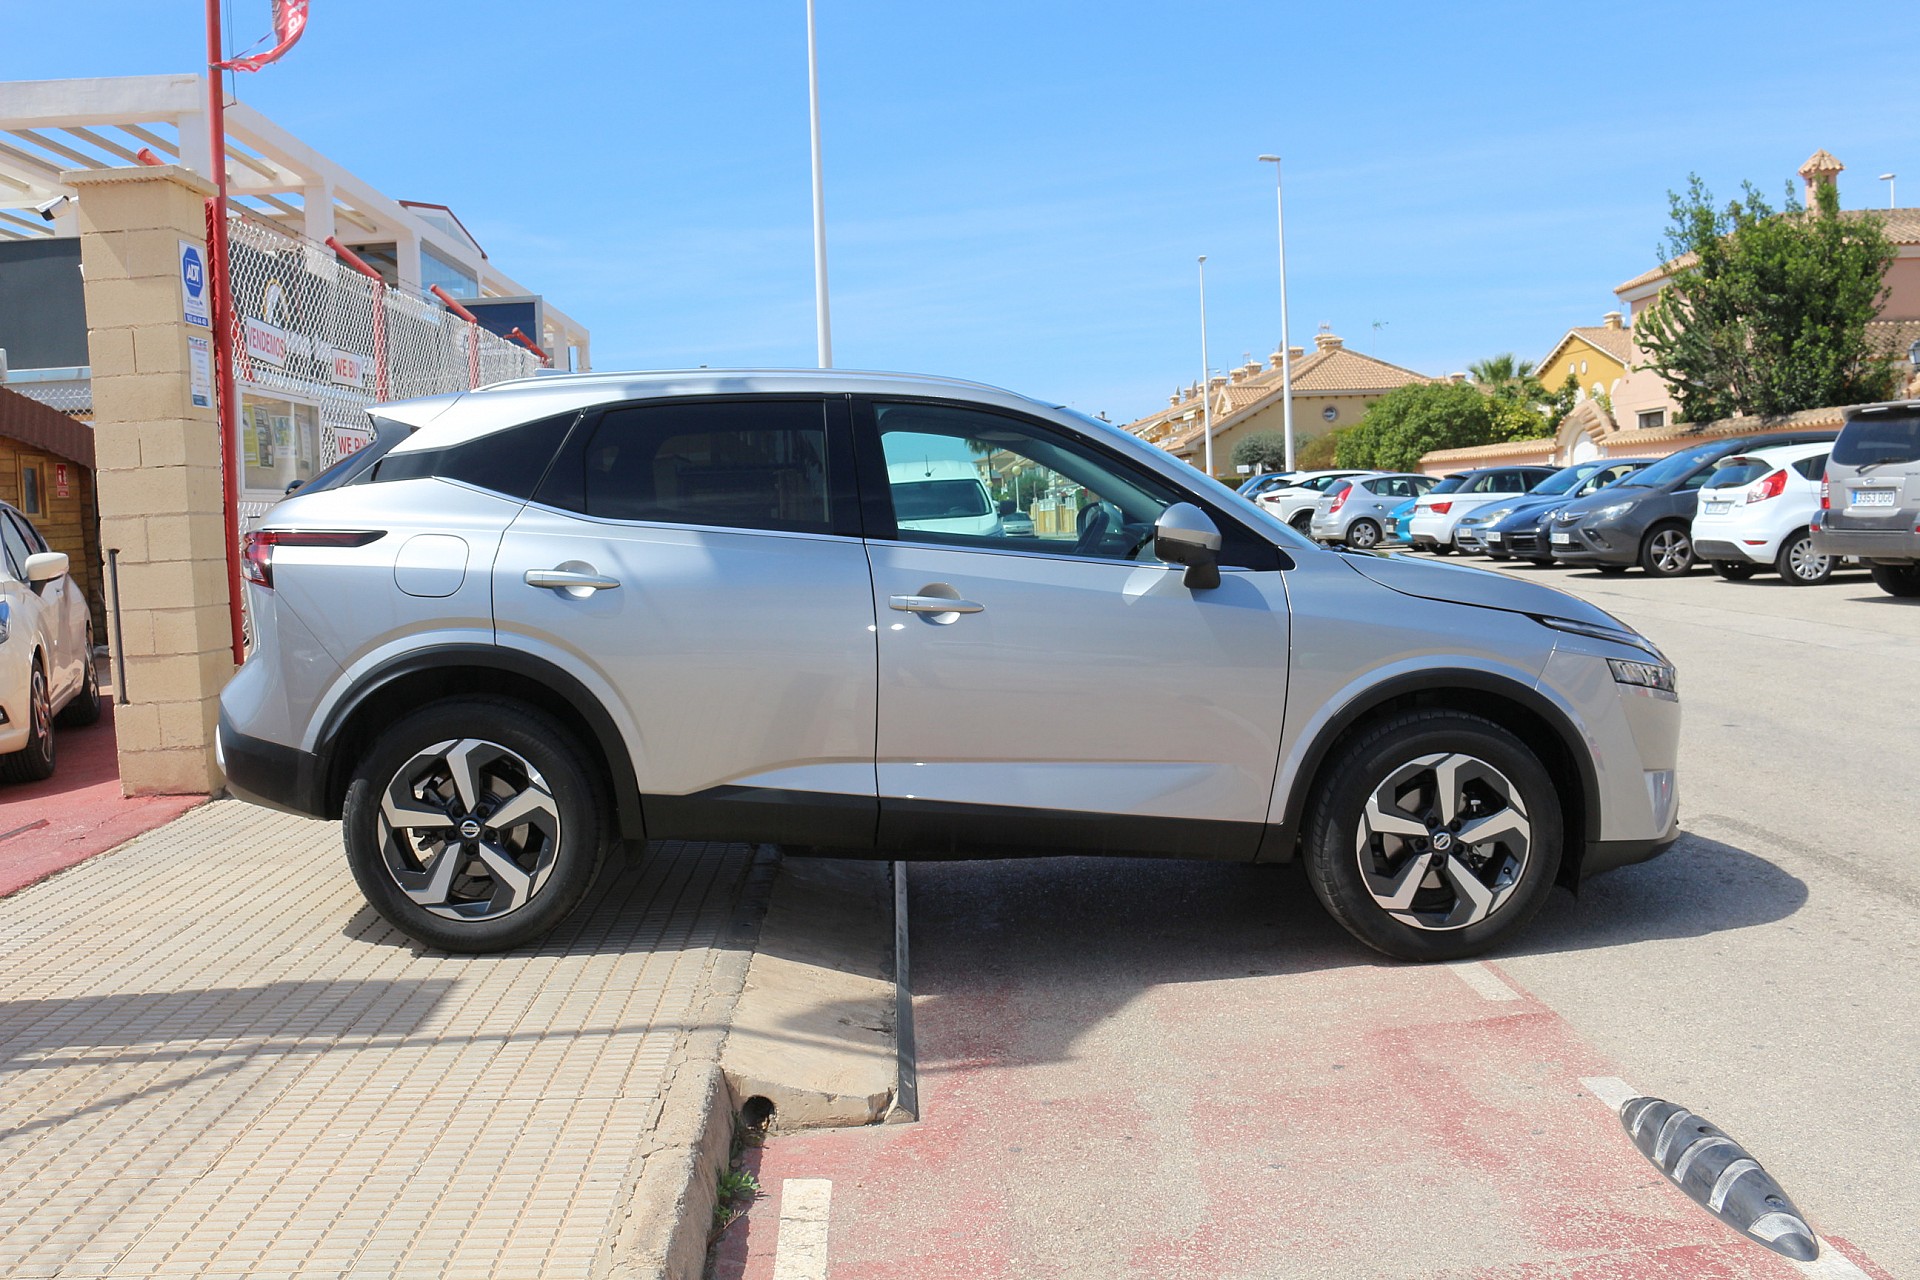 Nissan QASHQAI 1.3 DIG-T MHEV N-CONNECTA DCT  skyline pack - Costa Cars